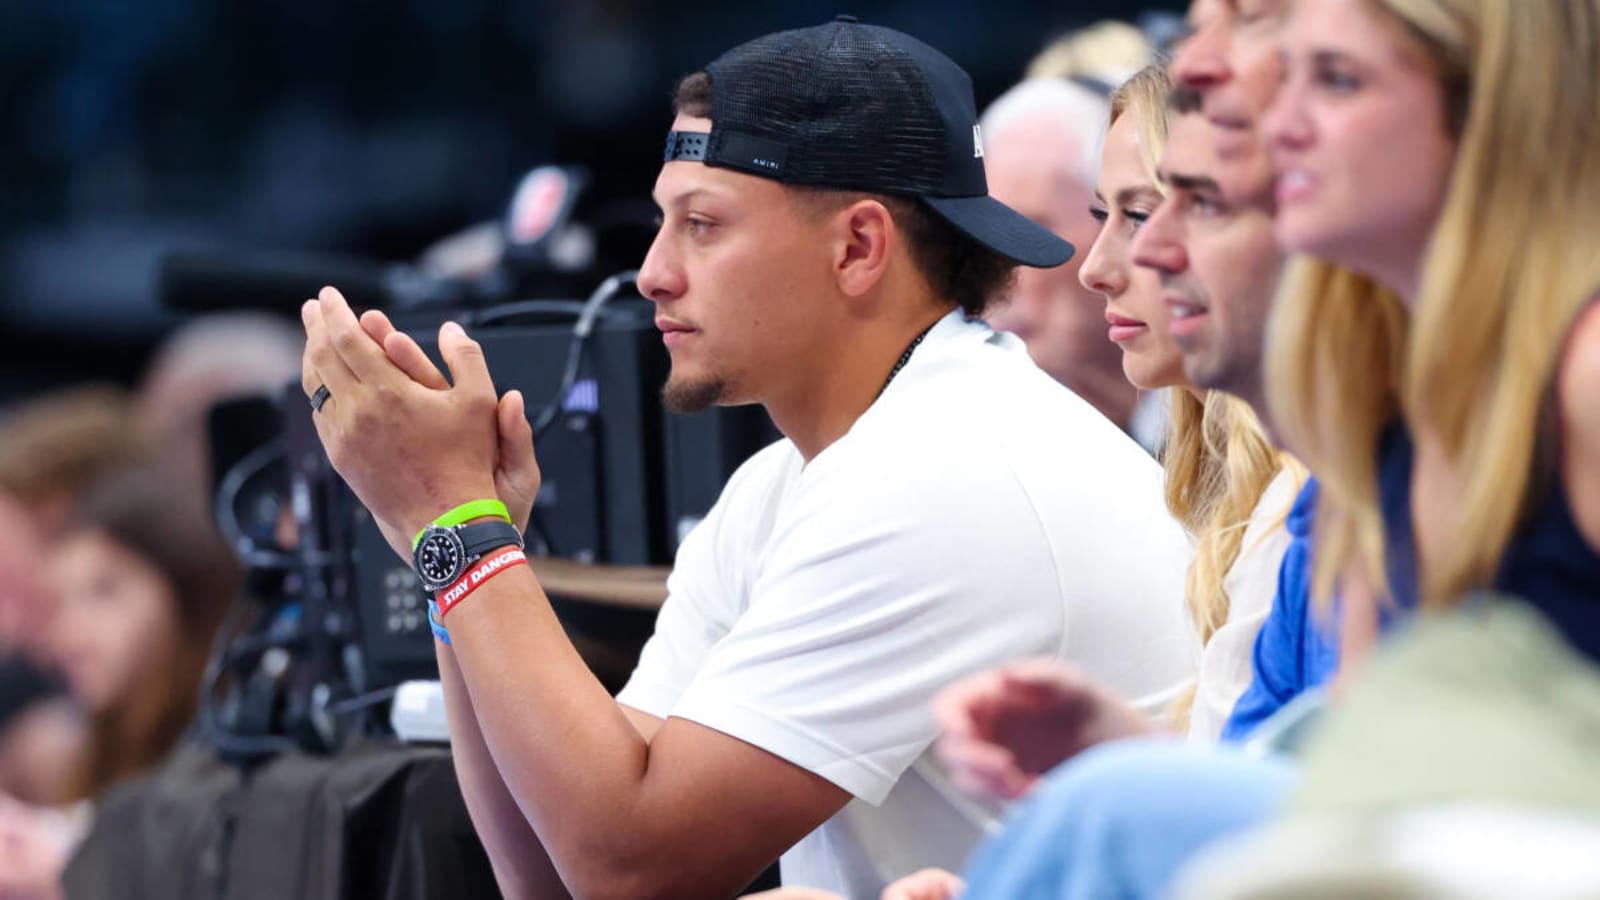 Chiefs quarterback Patrick Mahomes knows one NBA player who can easily make the switch to the NFL